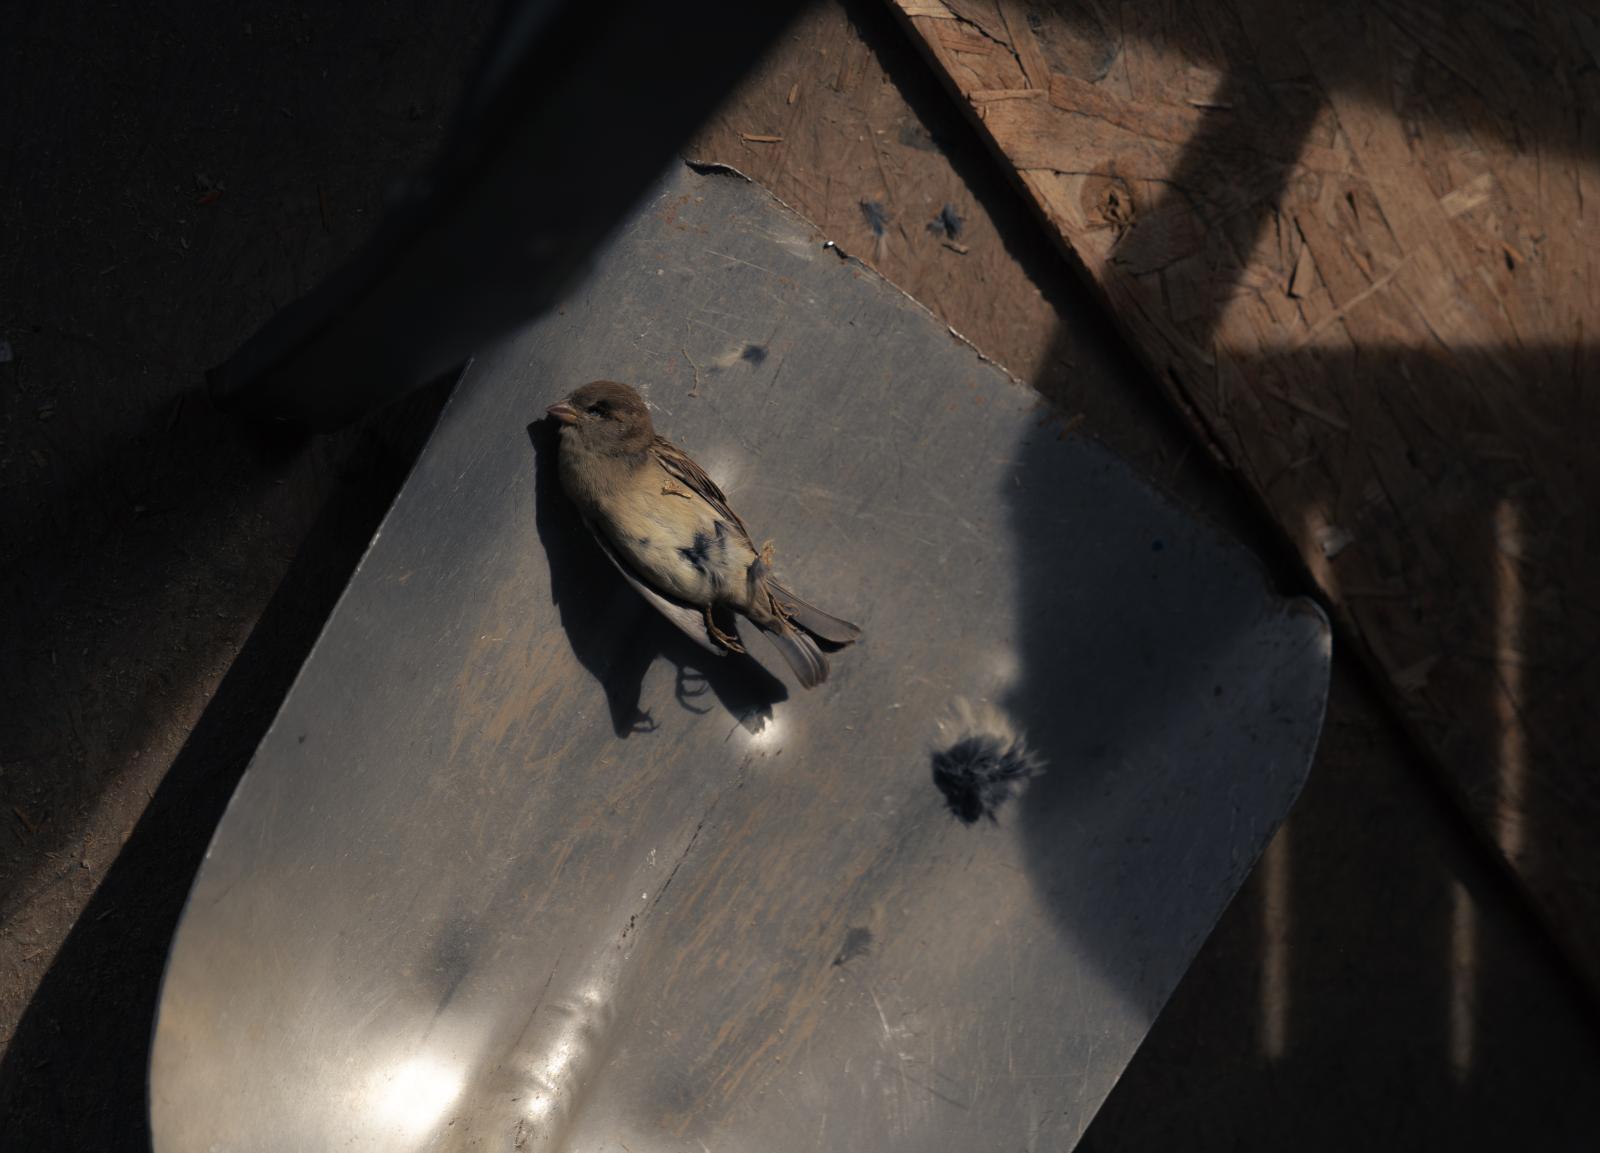 A Spirit of Abundance for Commonweal Magazine - Tori and Sarah were sorry to find a house sparrow that had been trapped in the house they were...